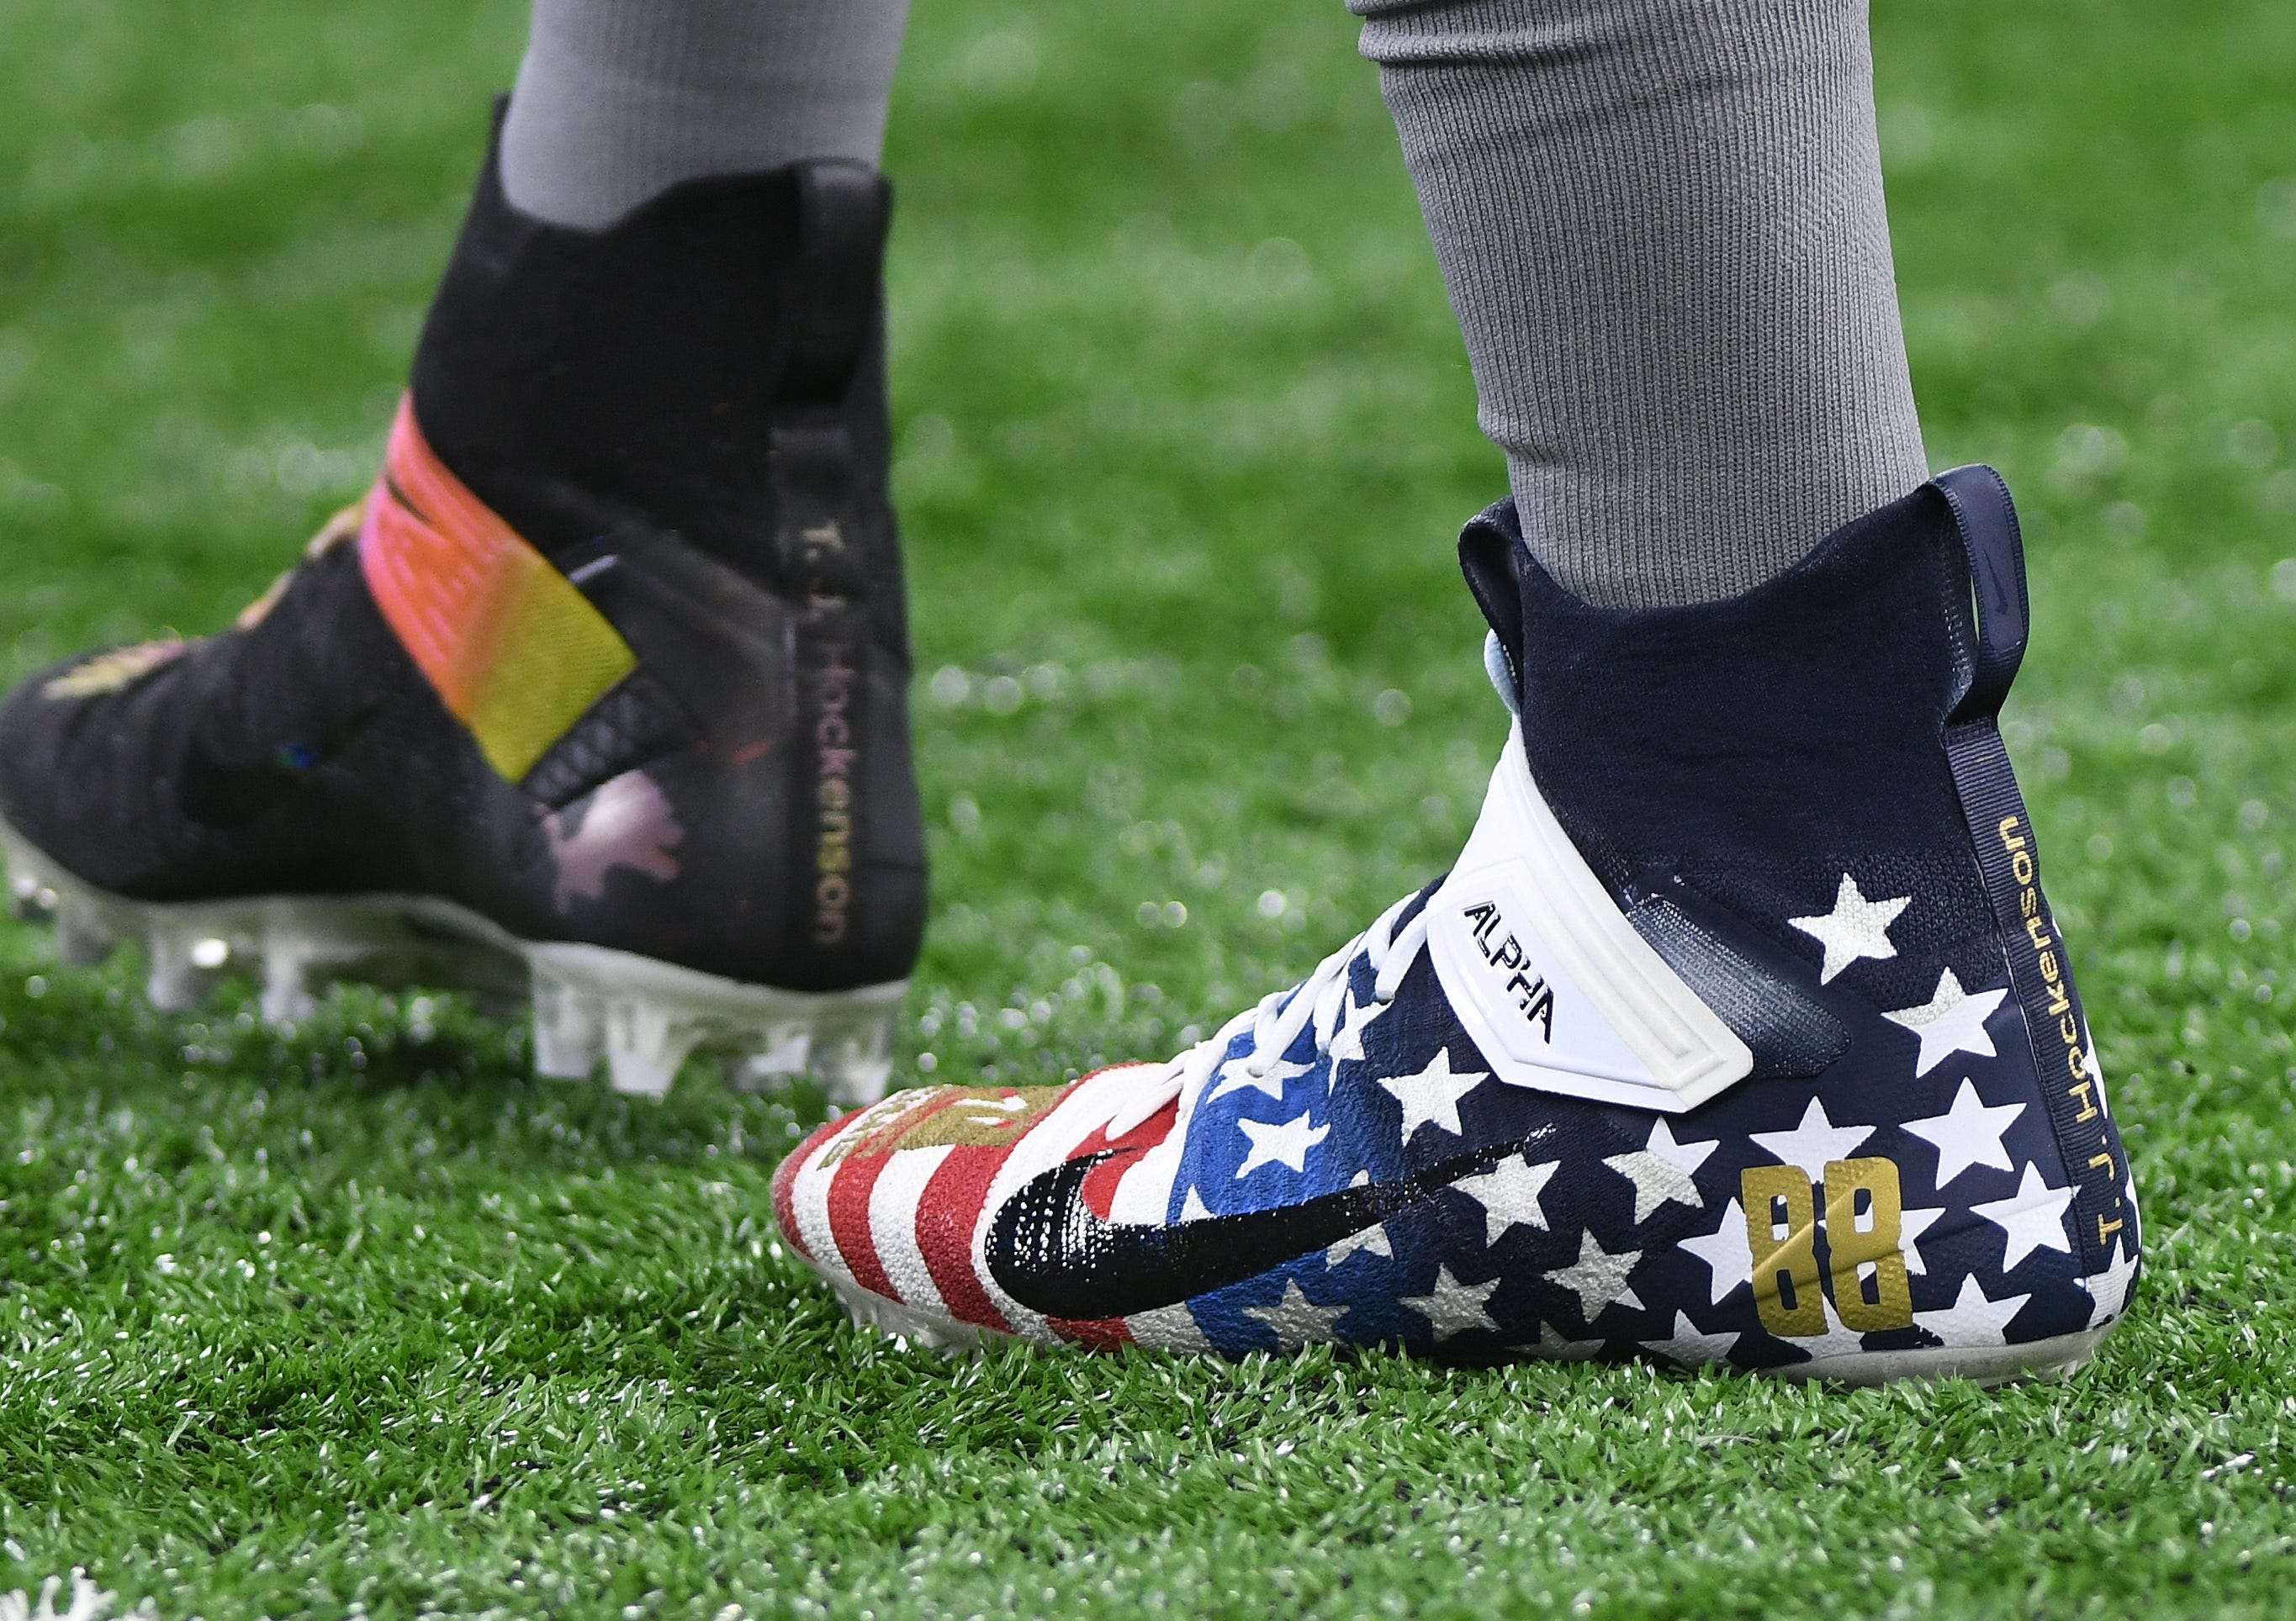 Lions tight end T.J. Hockenso's shoes worn during 'NFL My Cause My Cleats' before the game against the Vikings.